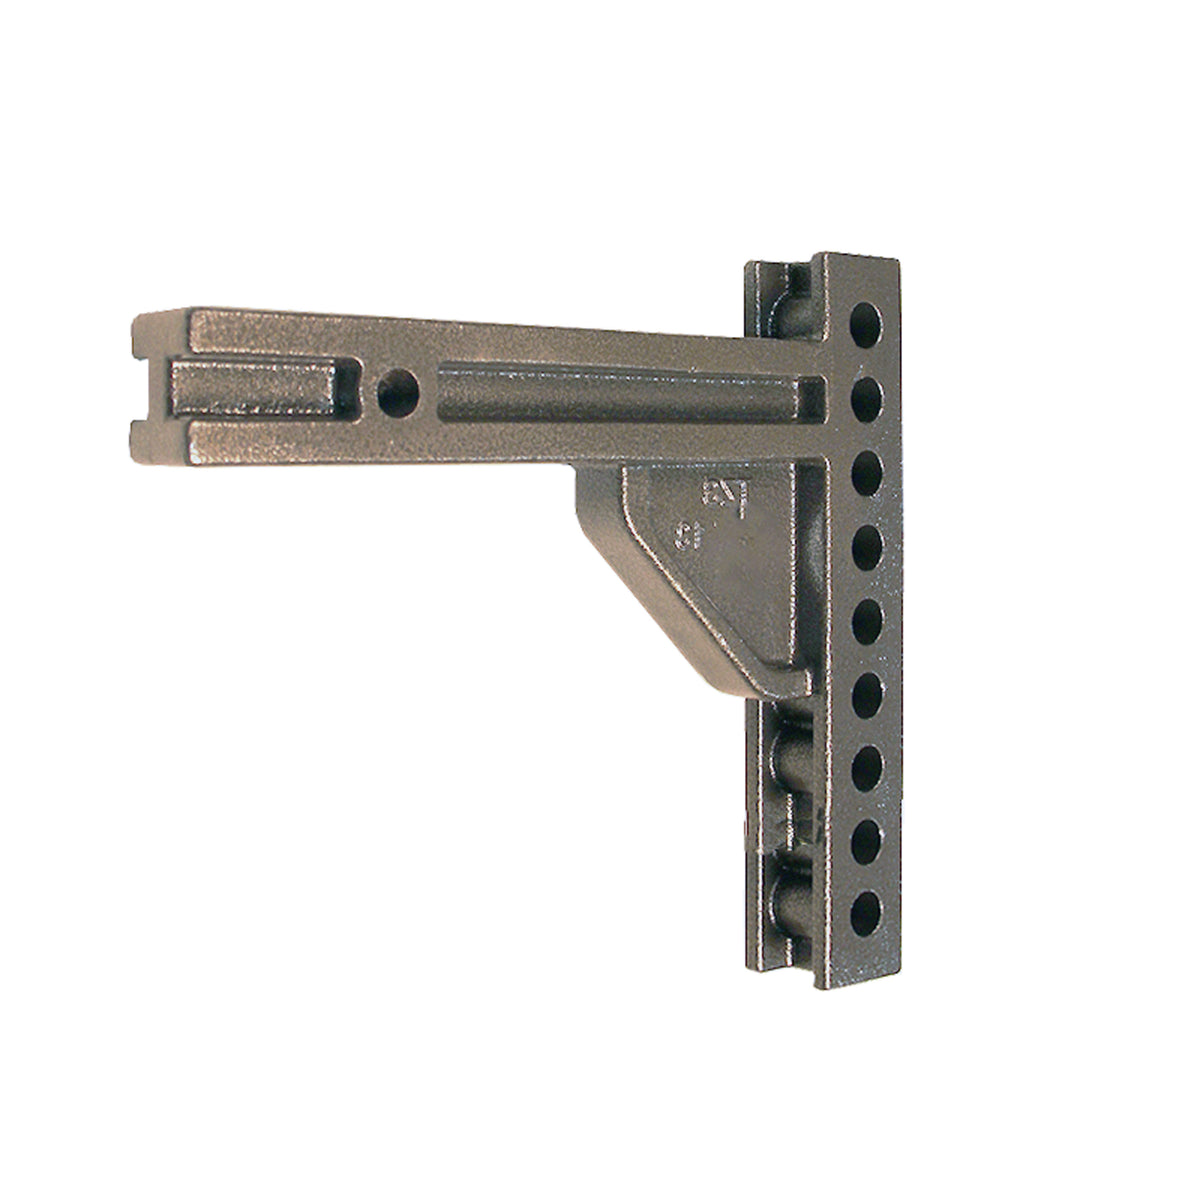 Blue Ox BXW0556 SwayPro Weight Distributing Hitch with 11 Hole Shank - 550 lb. TW